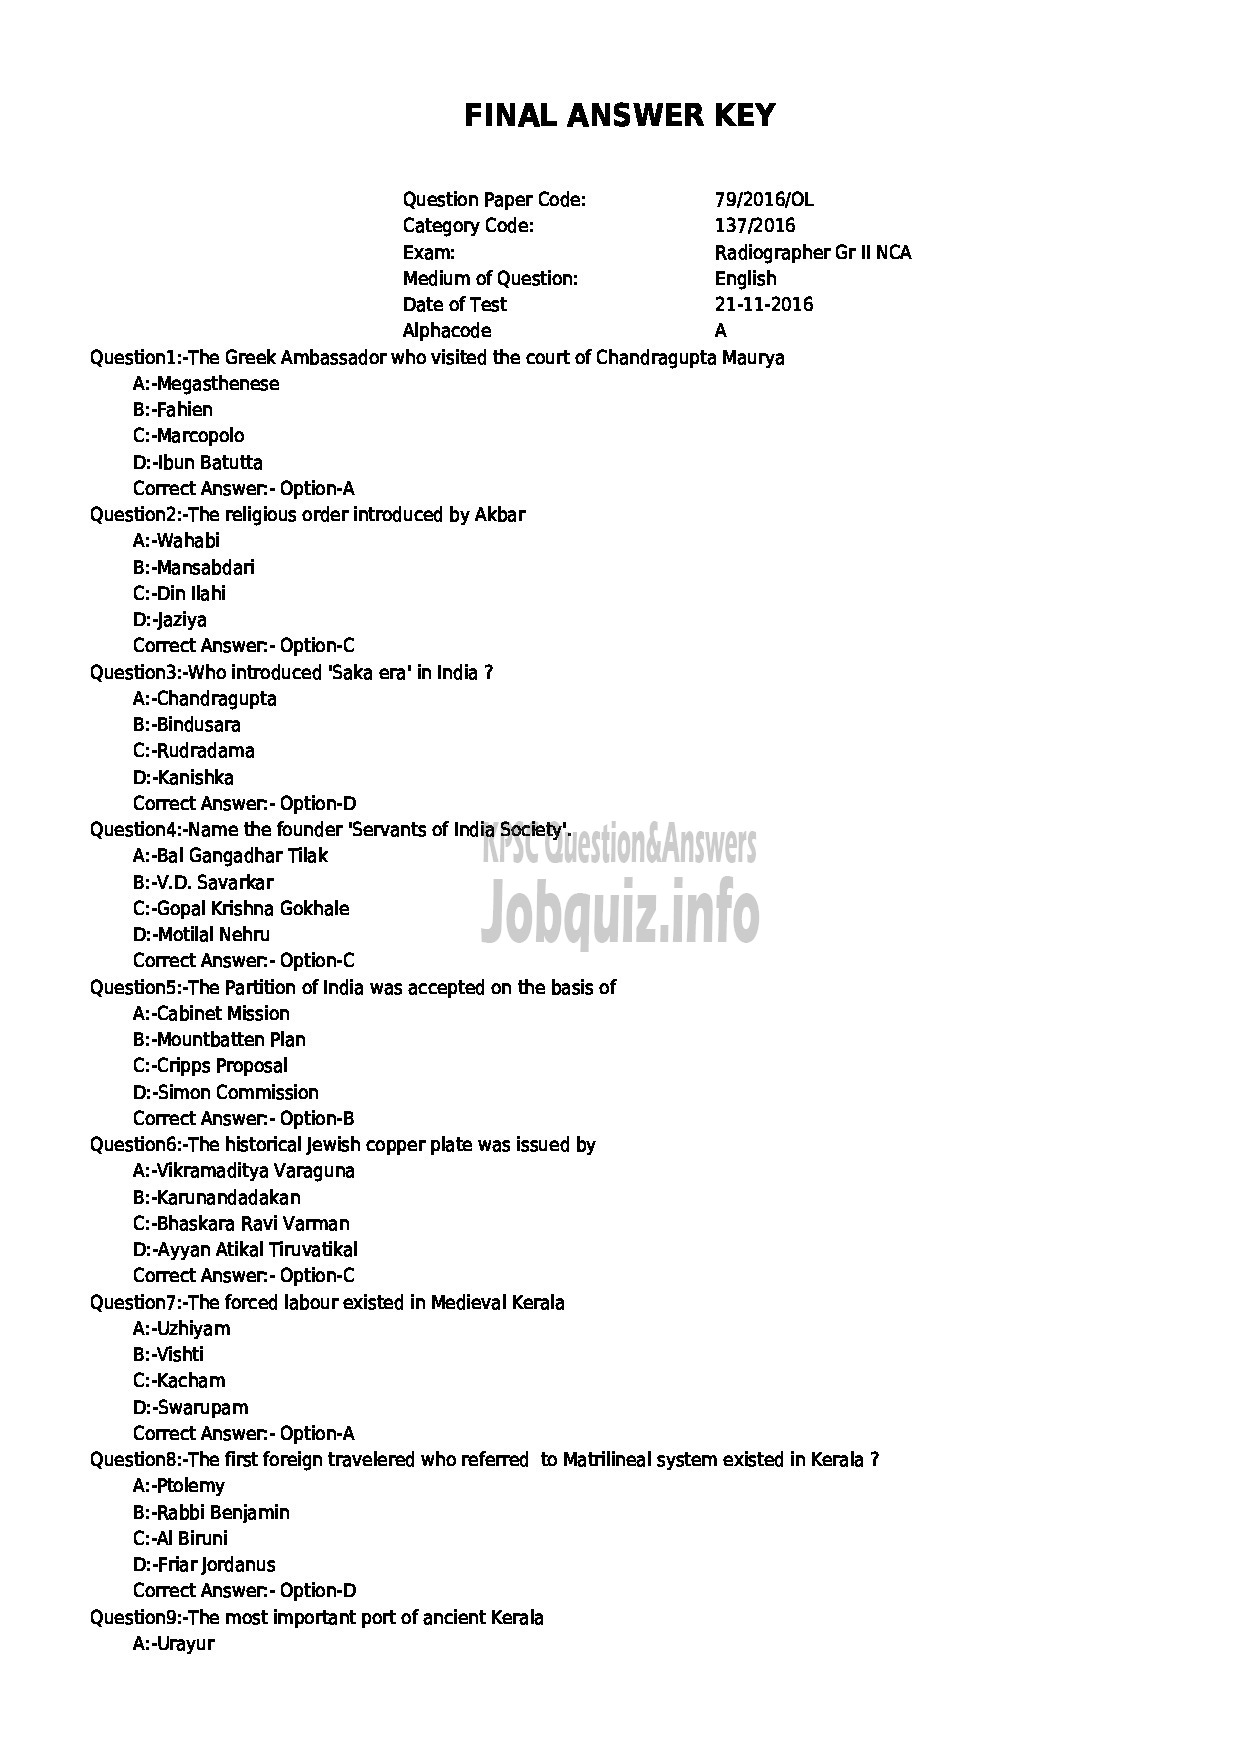 Kerala PSC Question Paper - RADIO GRAPHER GR II NCA OX HEALTH SERVICES-1